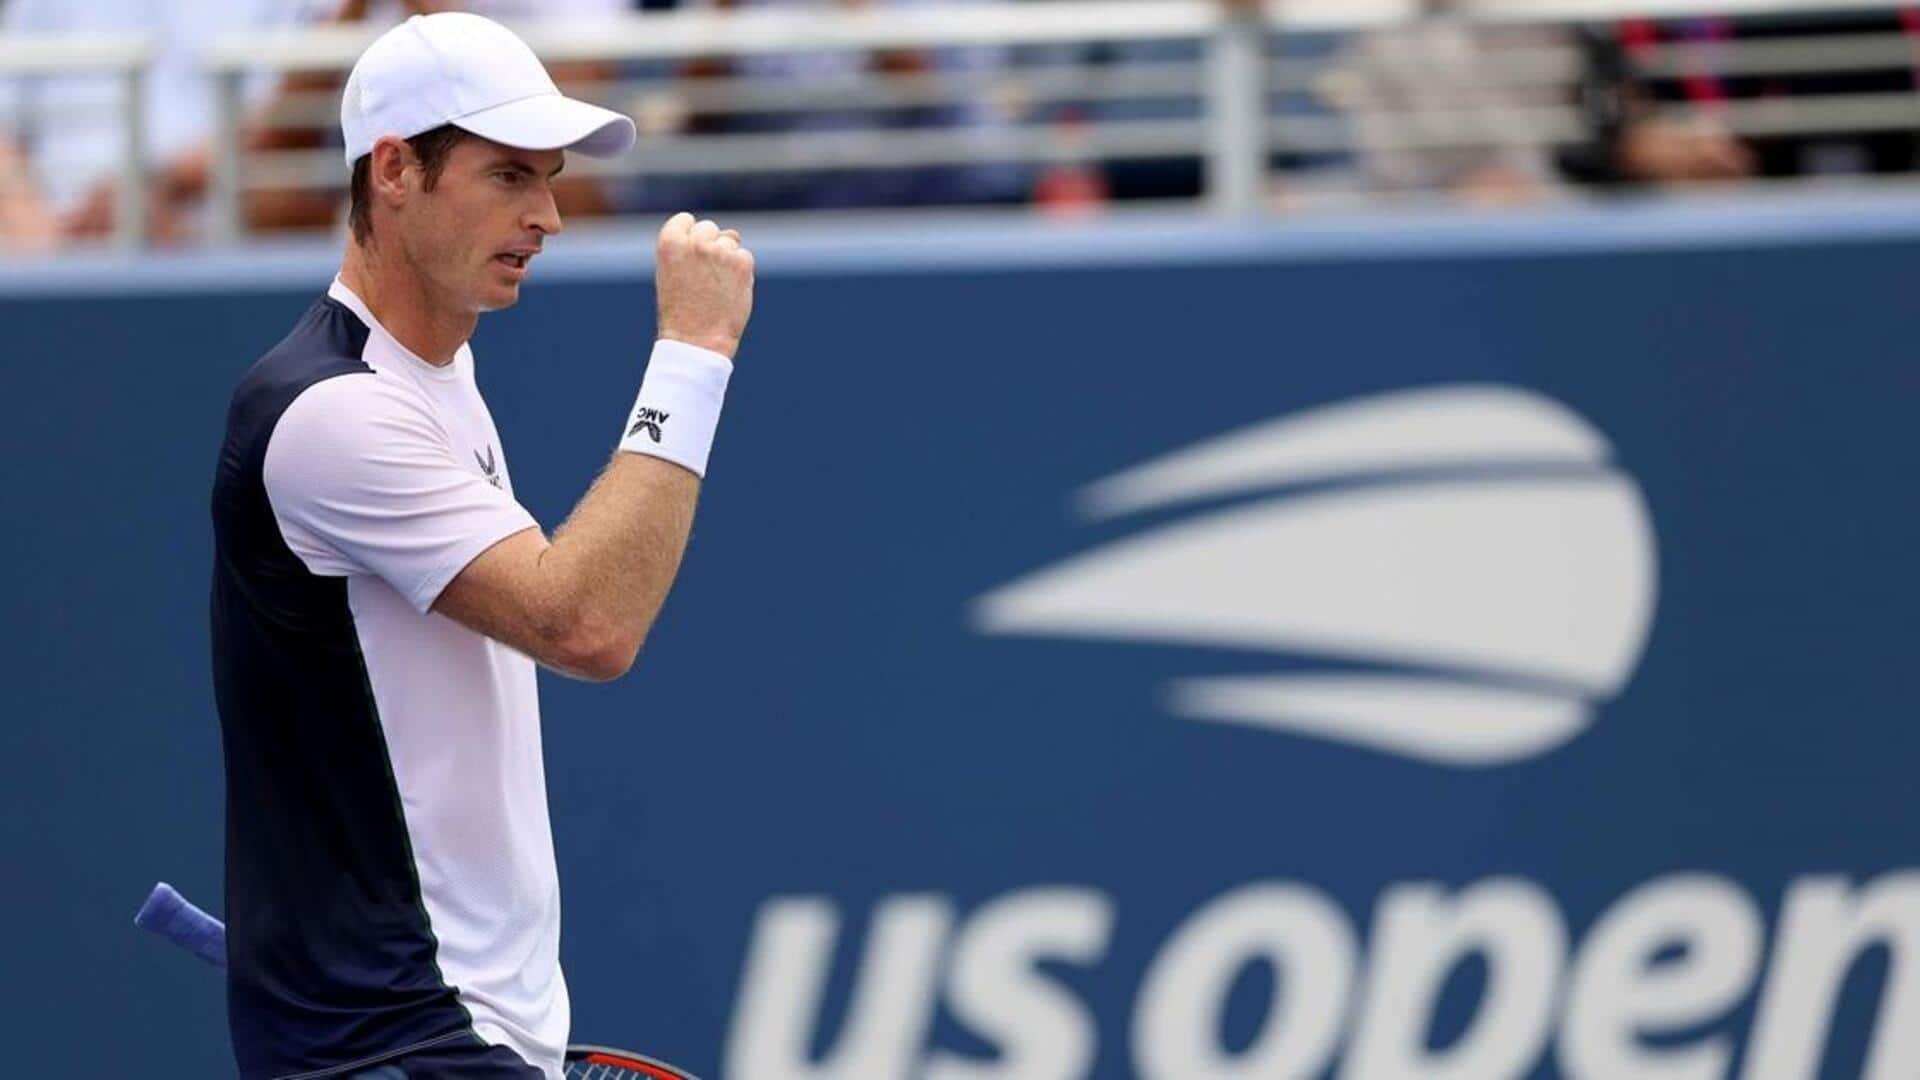 Andy Murray becomes ninth man to win 200 major matches